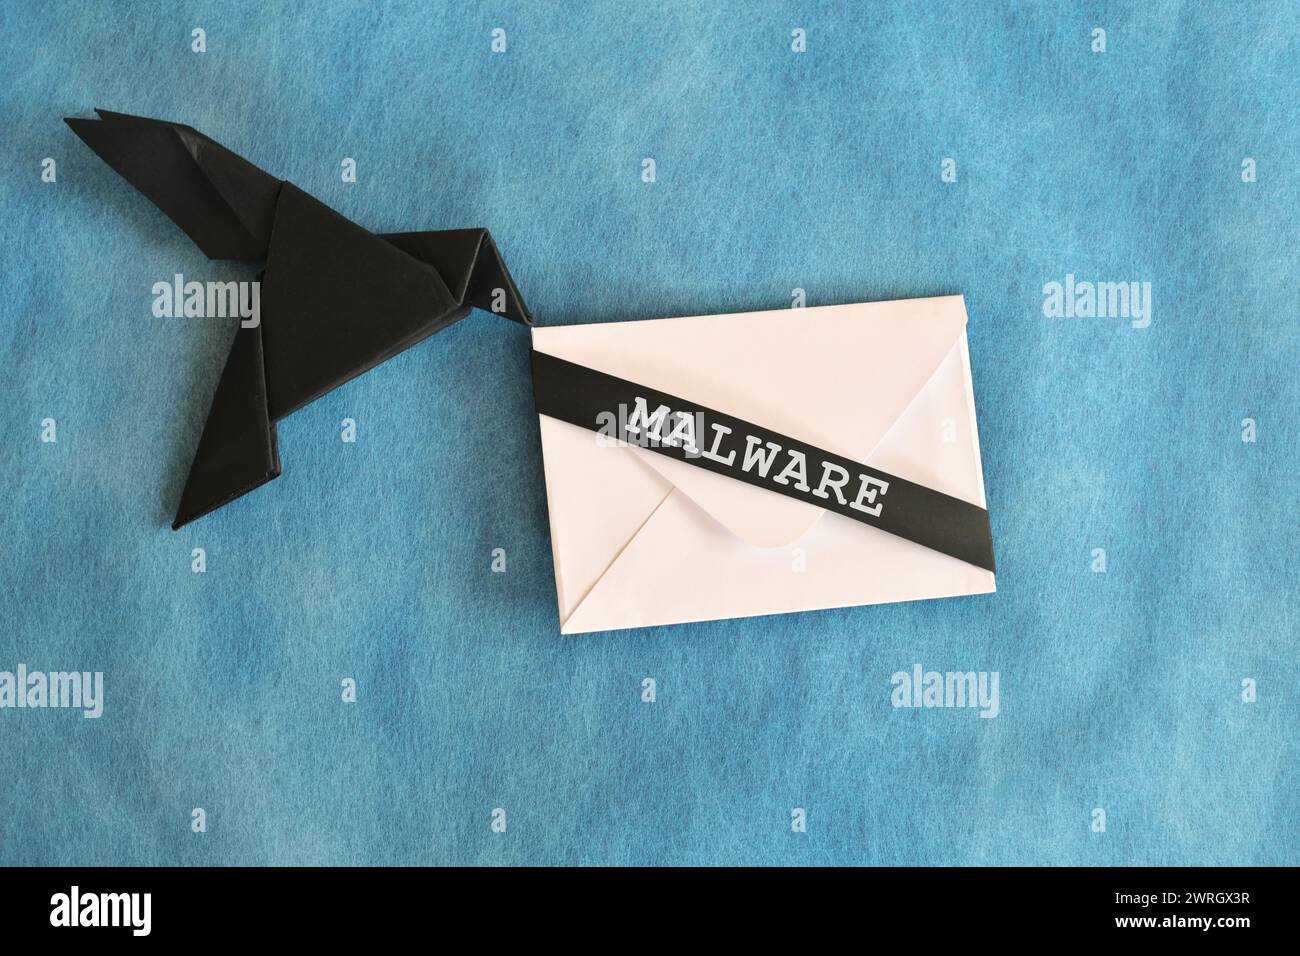 Black raven paper origami carrying white letter envelope with word Malware. Receiving malware attack email concept. Stock Photo